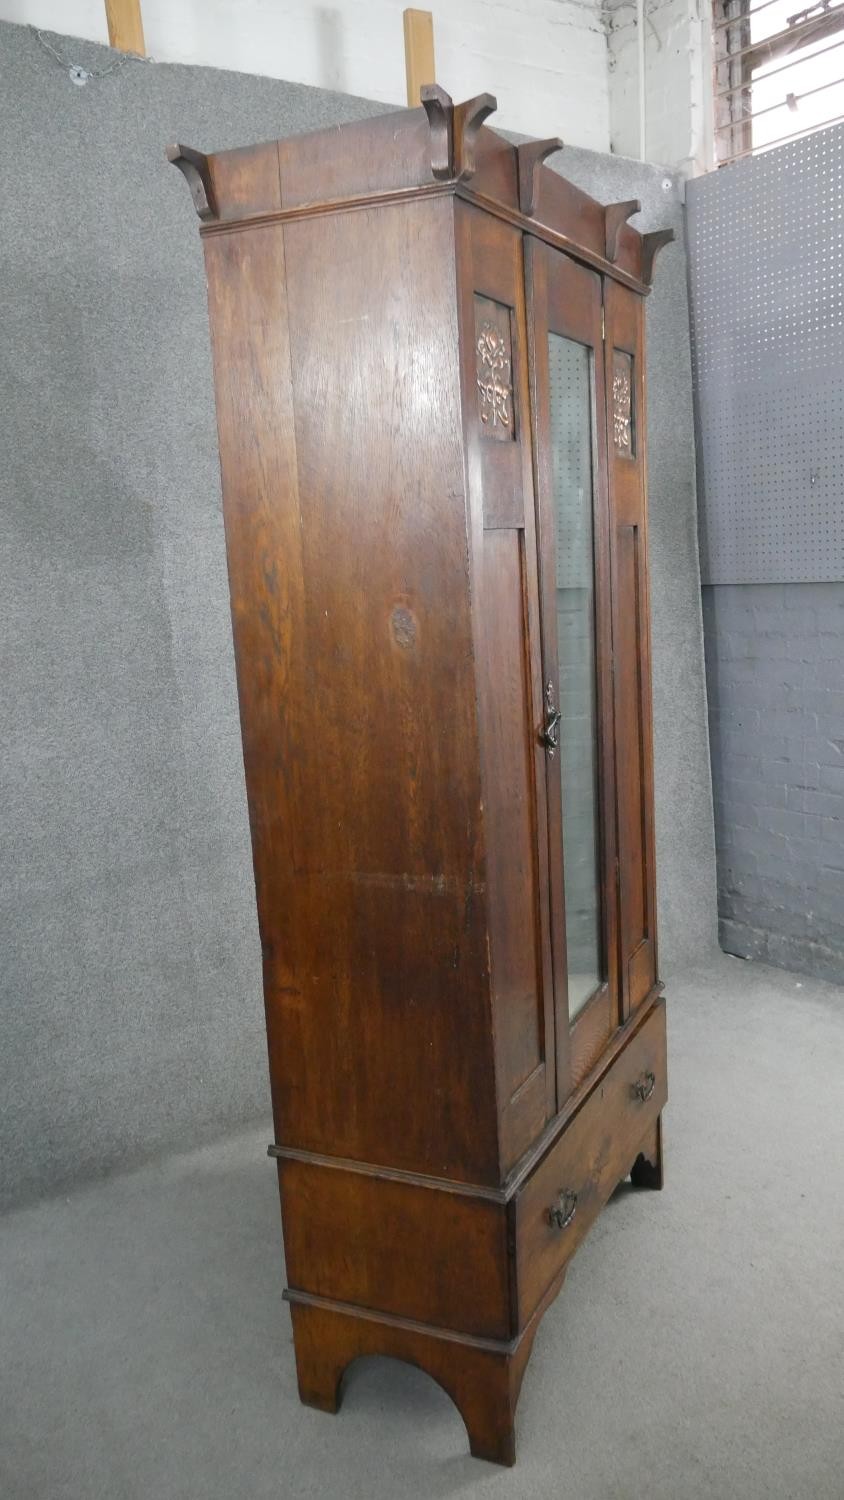 A late 19th century oak Arts and Crafts wardrobe with inset embossed copper panels. H.190 W.89 D. - Image 10 of 10